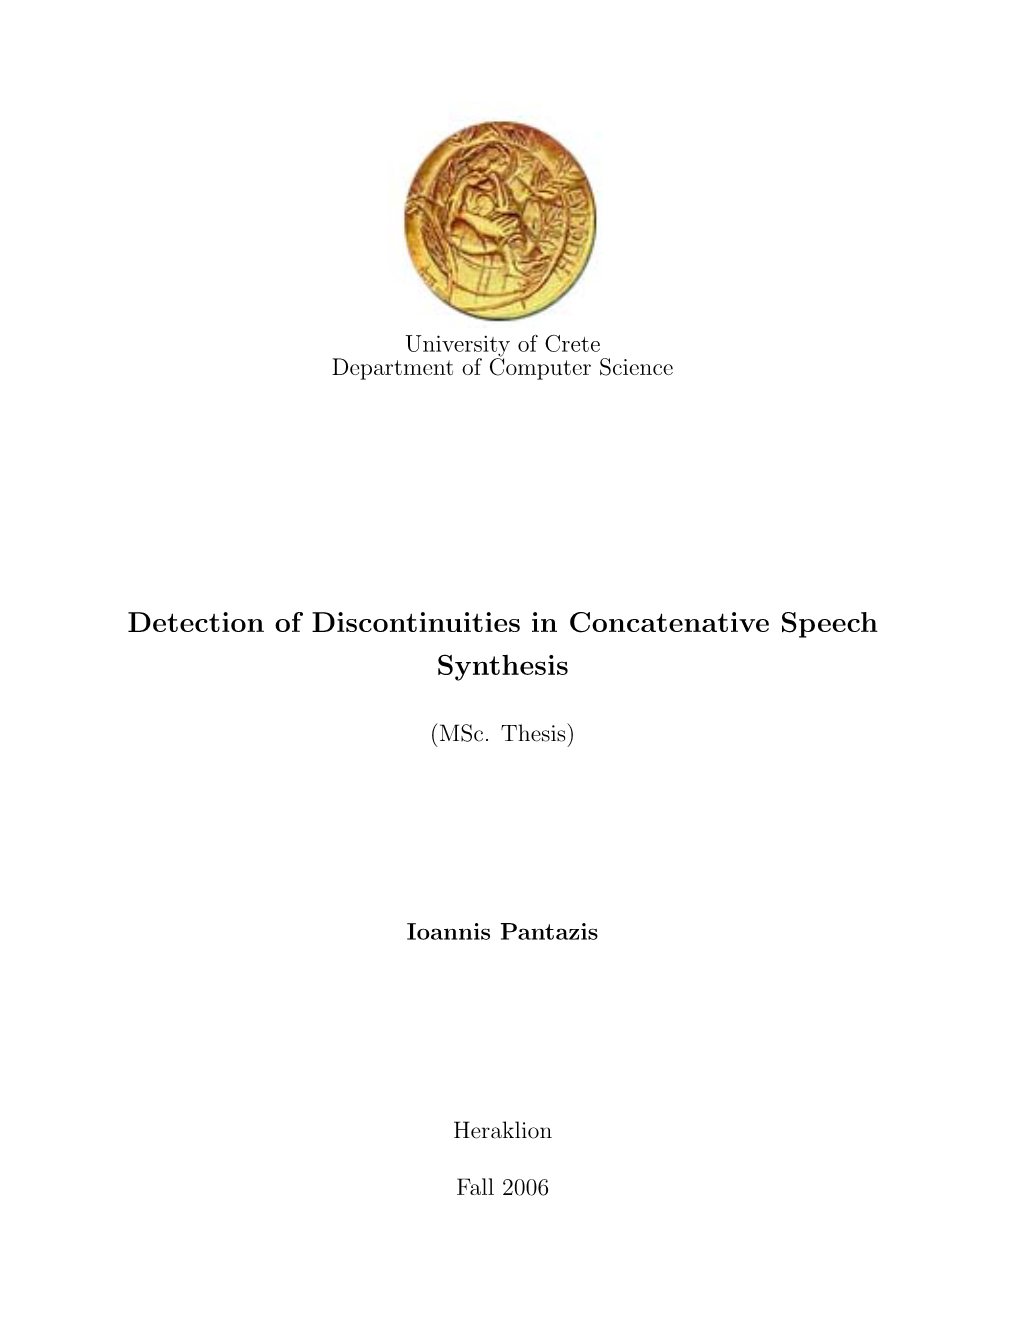 Detection of Discontinuities in Concatenative Speech Synthesis